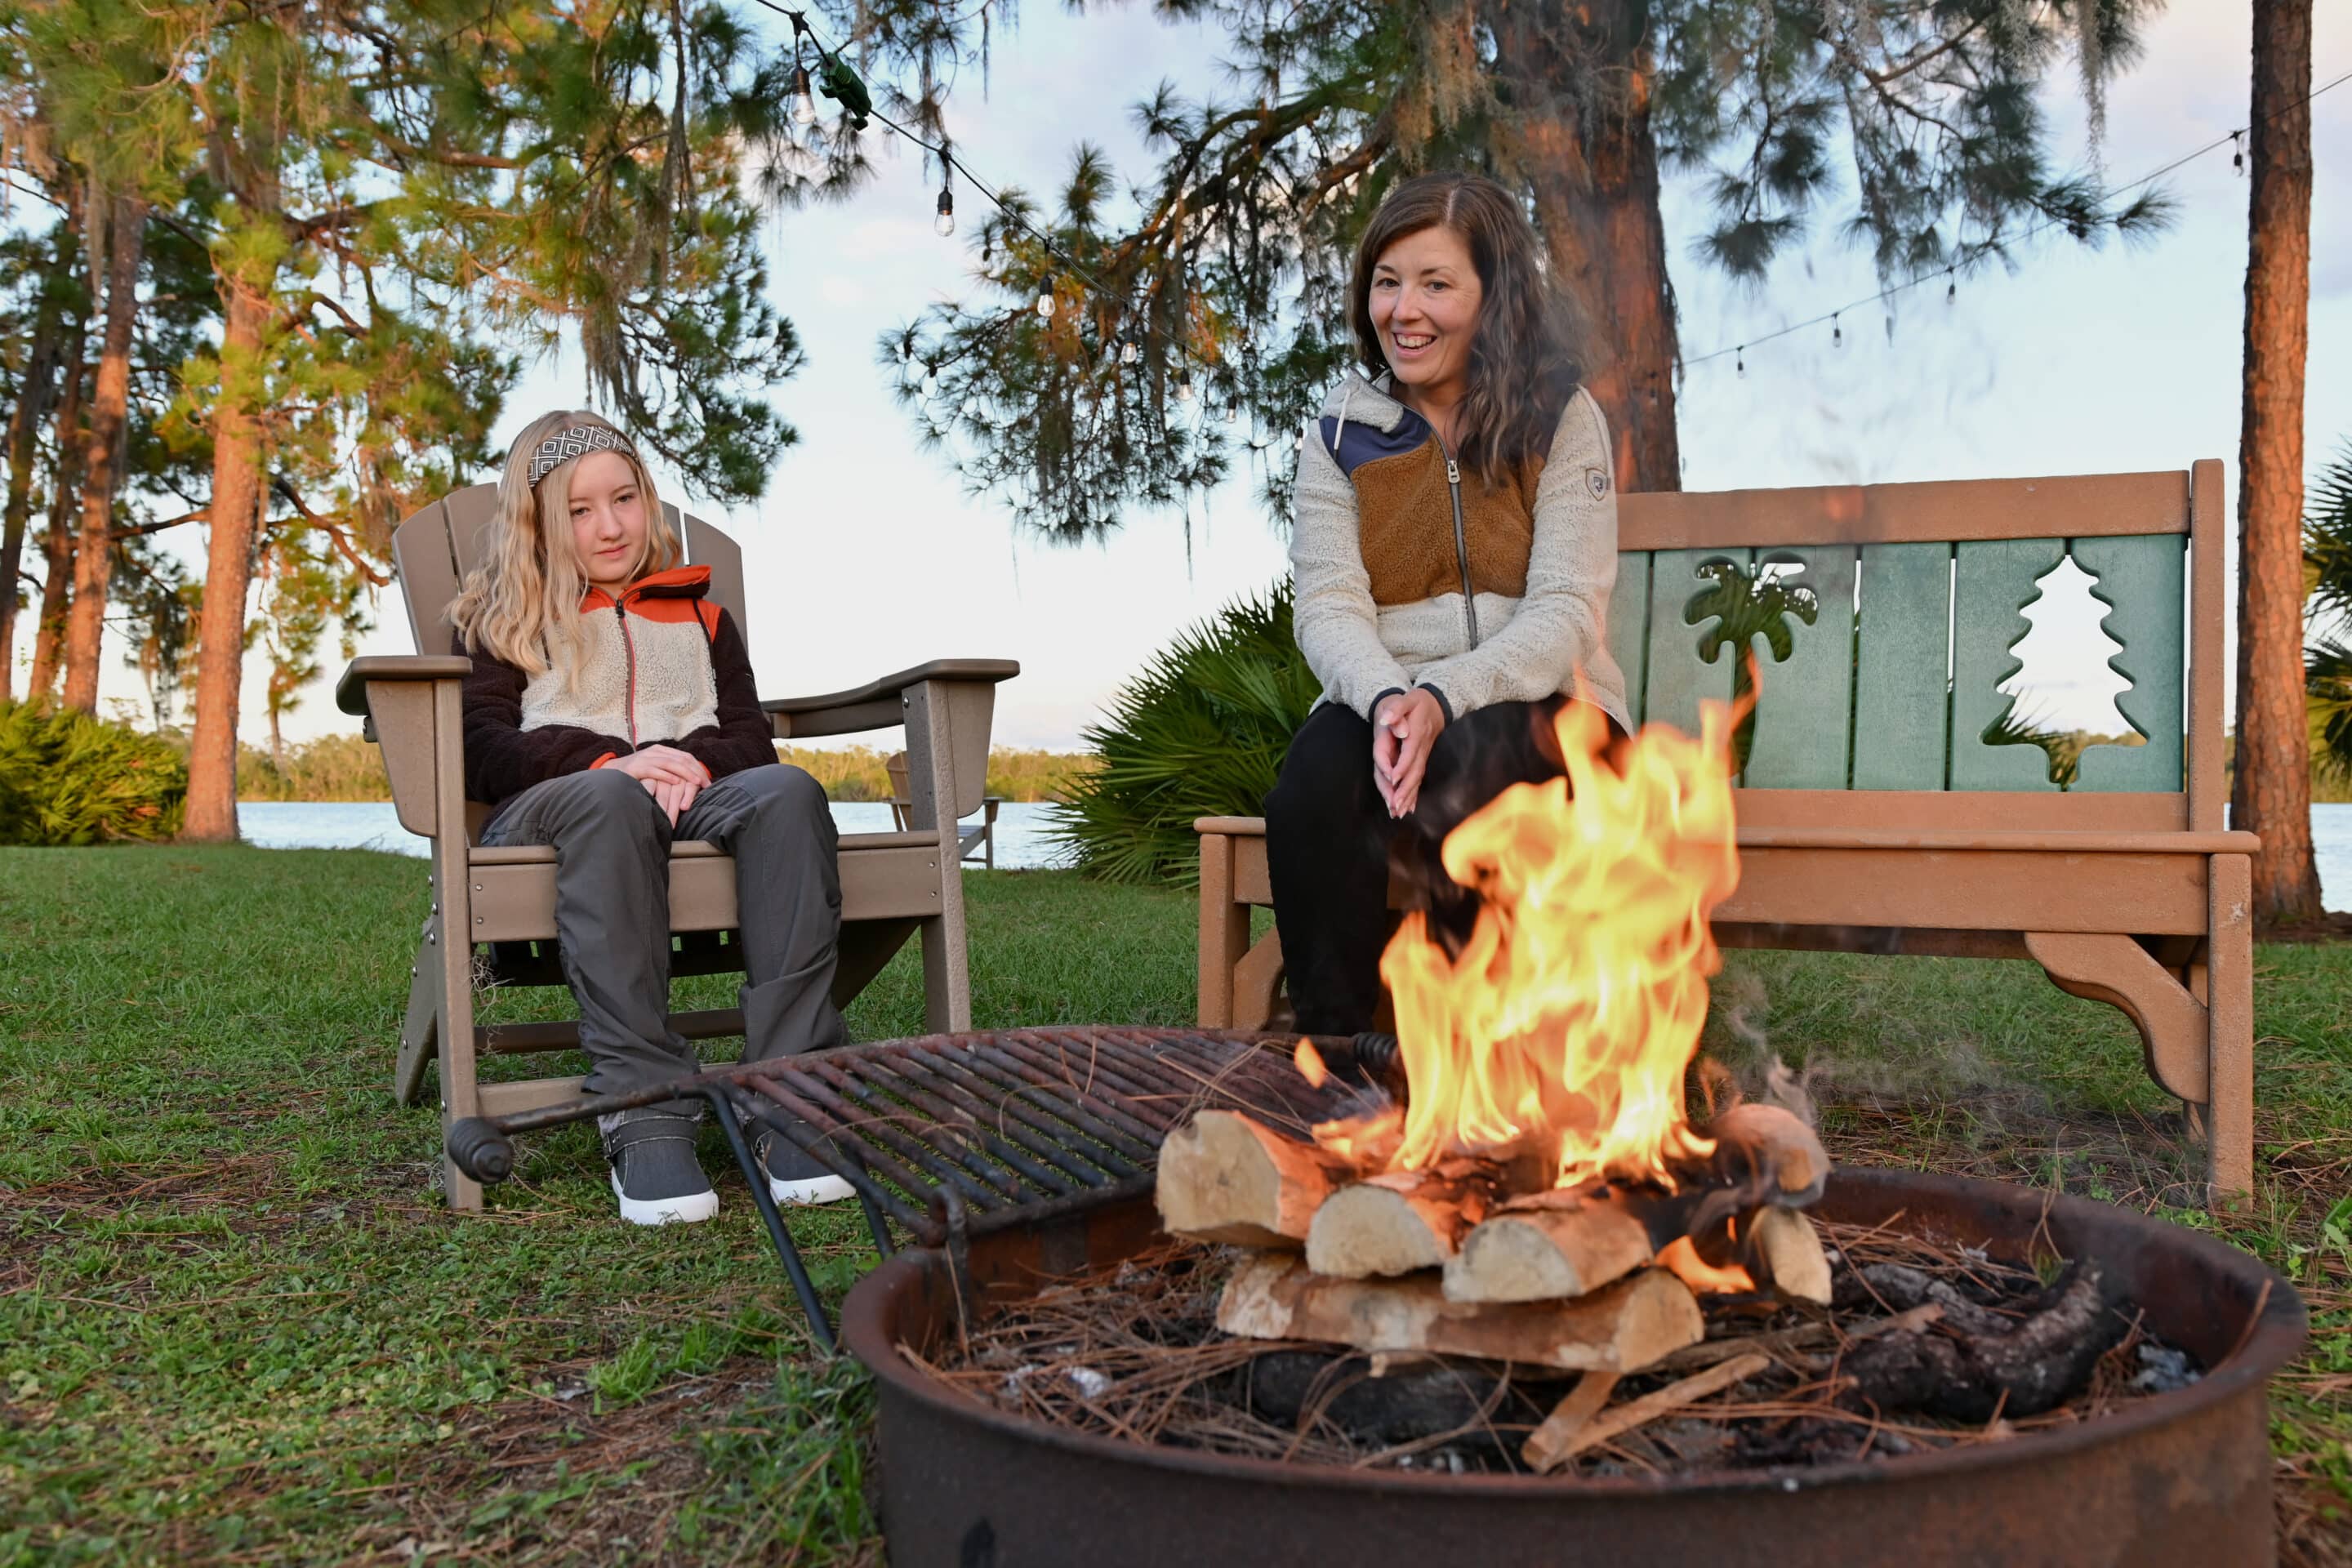 Campfire by the lake RVing - RV travel planning with AdventureGenie